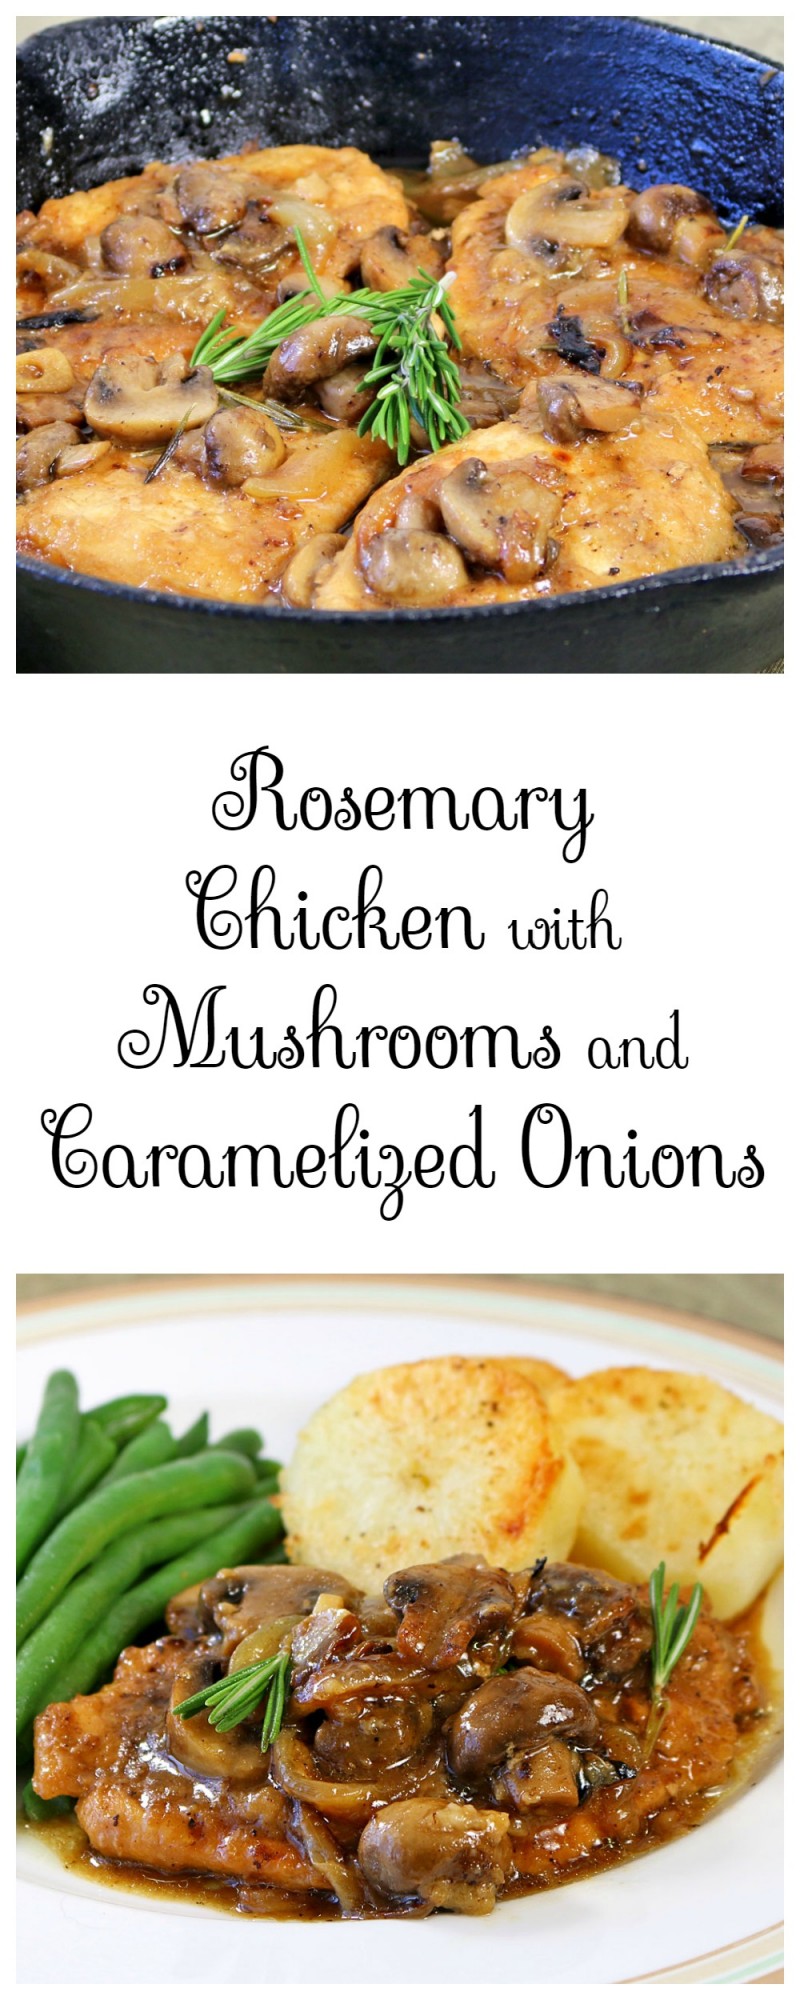 Rosemary Chicken with Mushrooms and Caramelized Onions